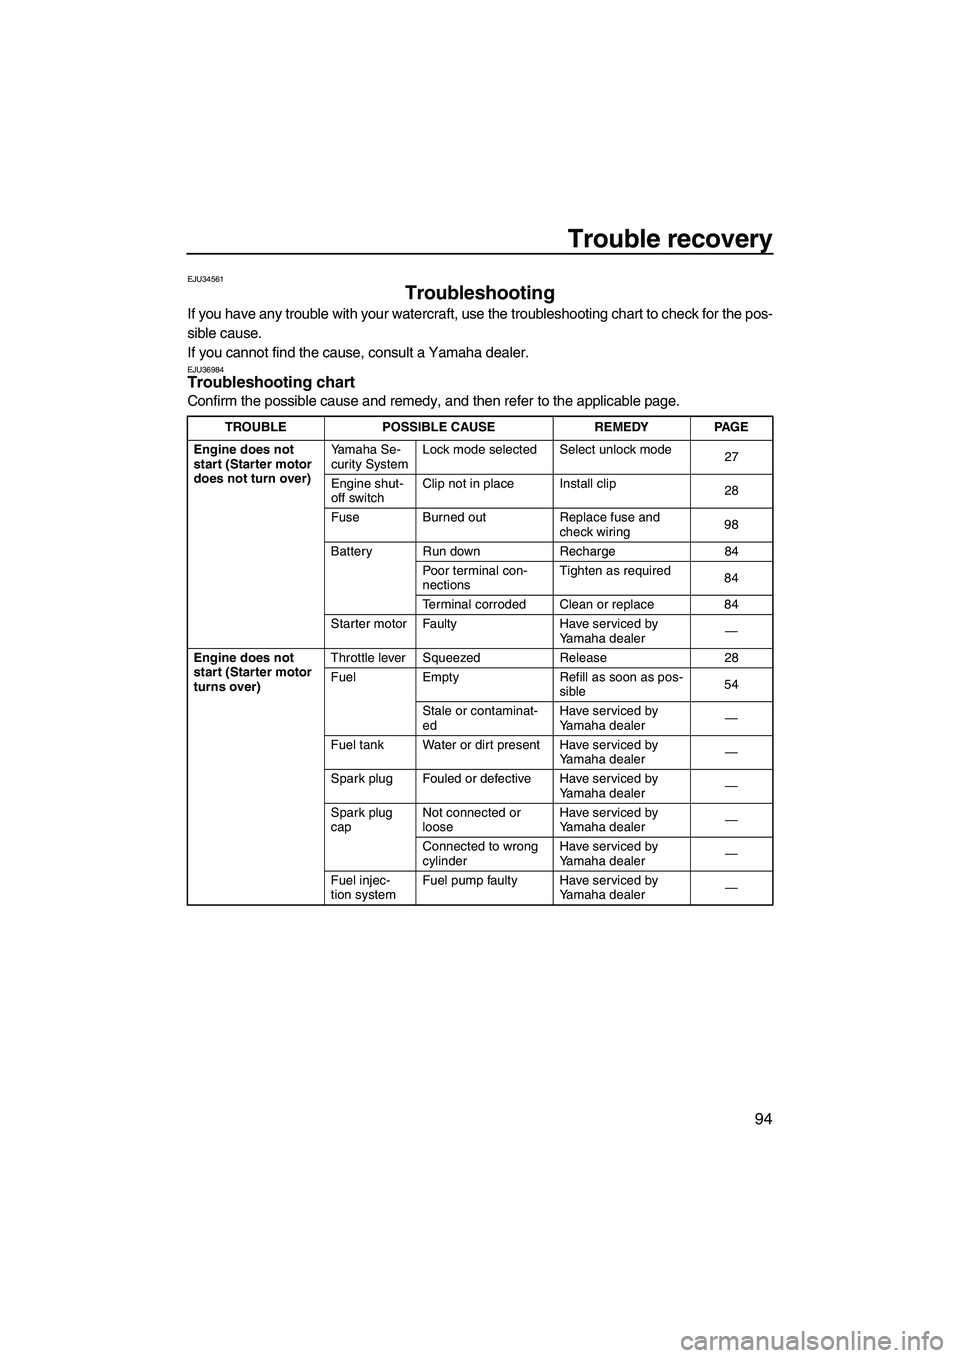 YAMAHA FX SHO 2010  Owners Manual Trouble recovery
94
EJU34561
Troubleshooting 
If you have any trouble with your watercraft, use the troubleshooting chart to check for the pos-
sible cause.
If you cannot find the cause, consult a Yam